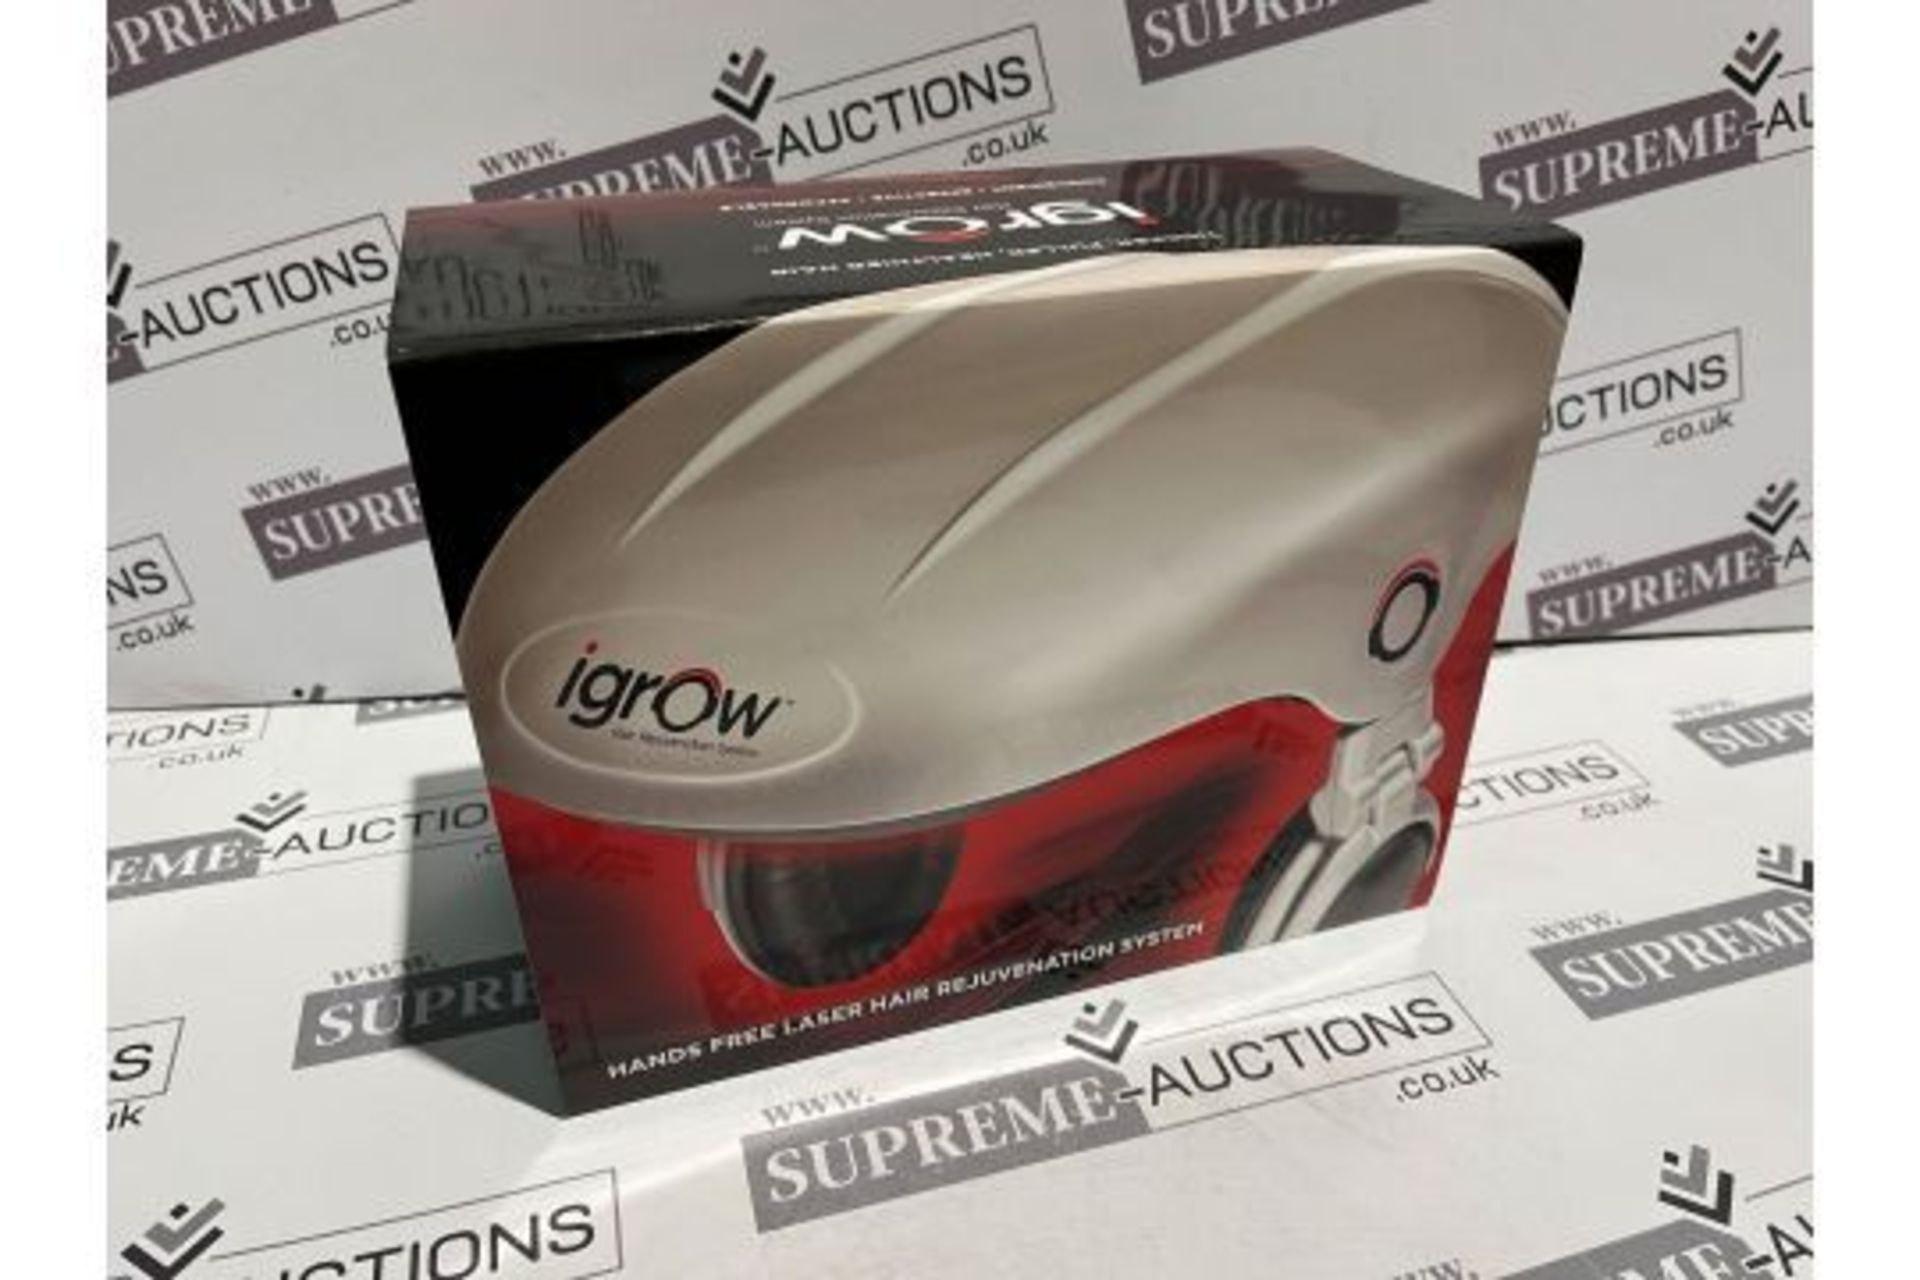 Brand New iGrow Professional Laser Hair Growth System R13-13- FDA Cleared Laser Cap Hair Growth